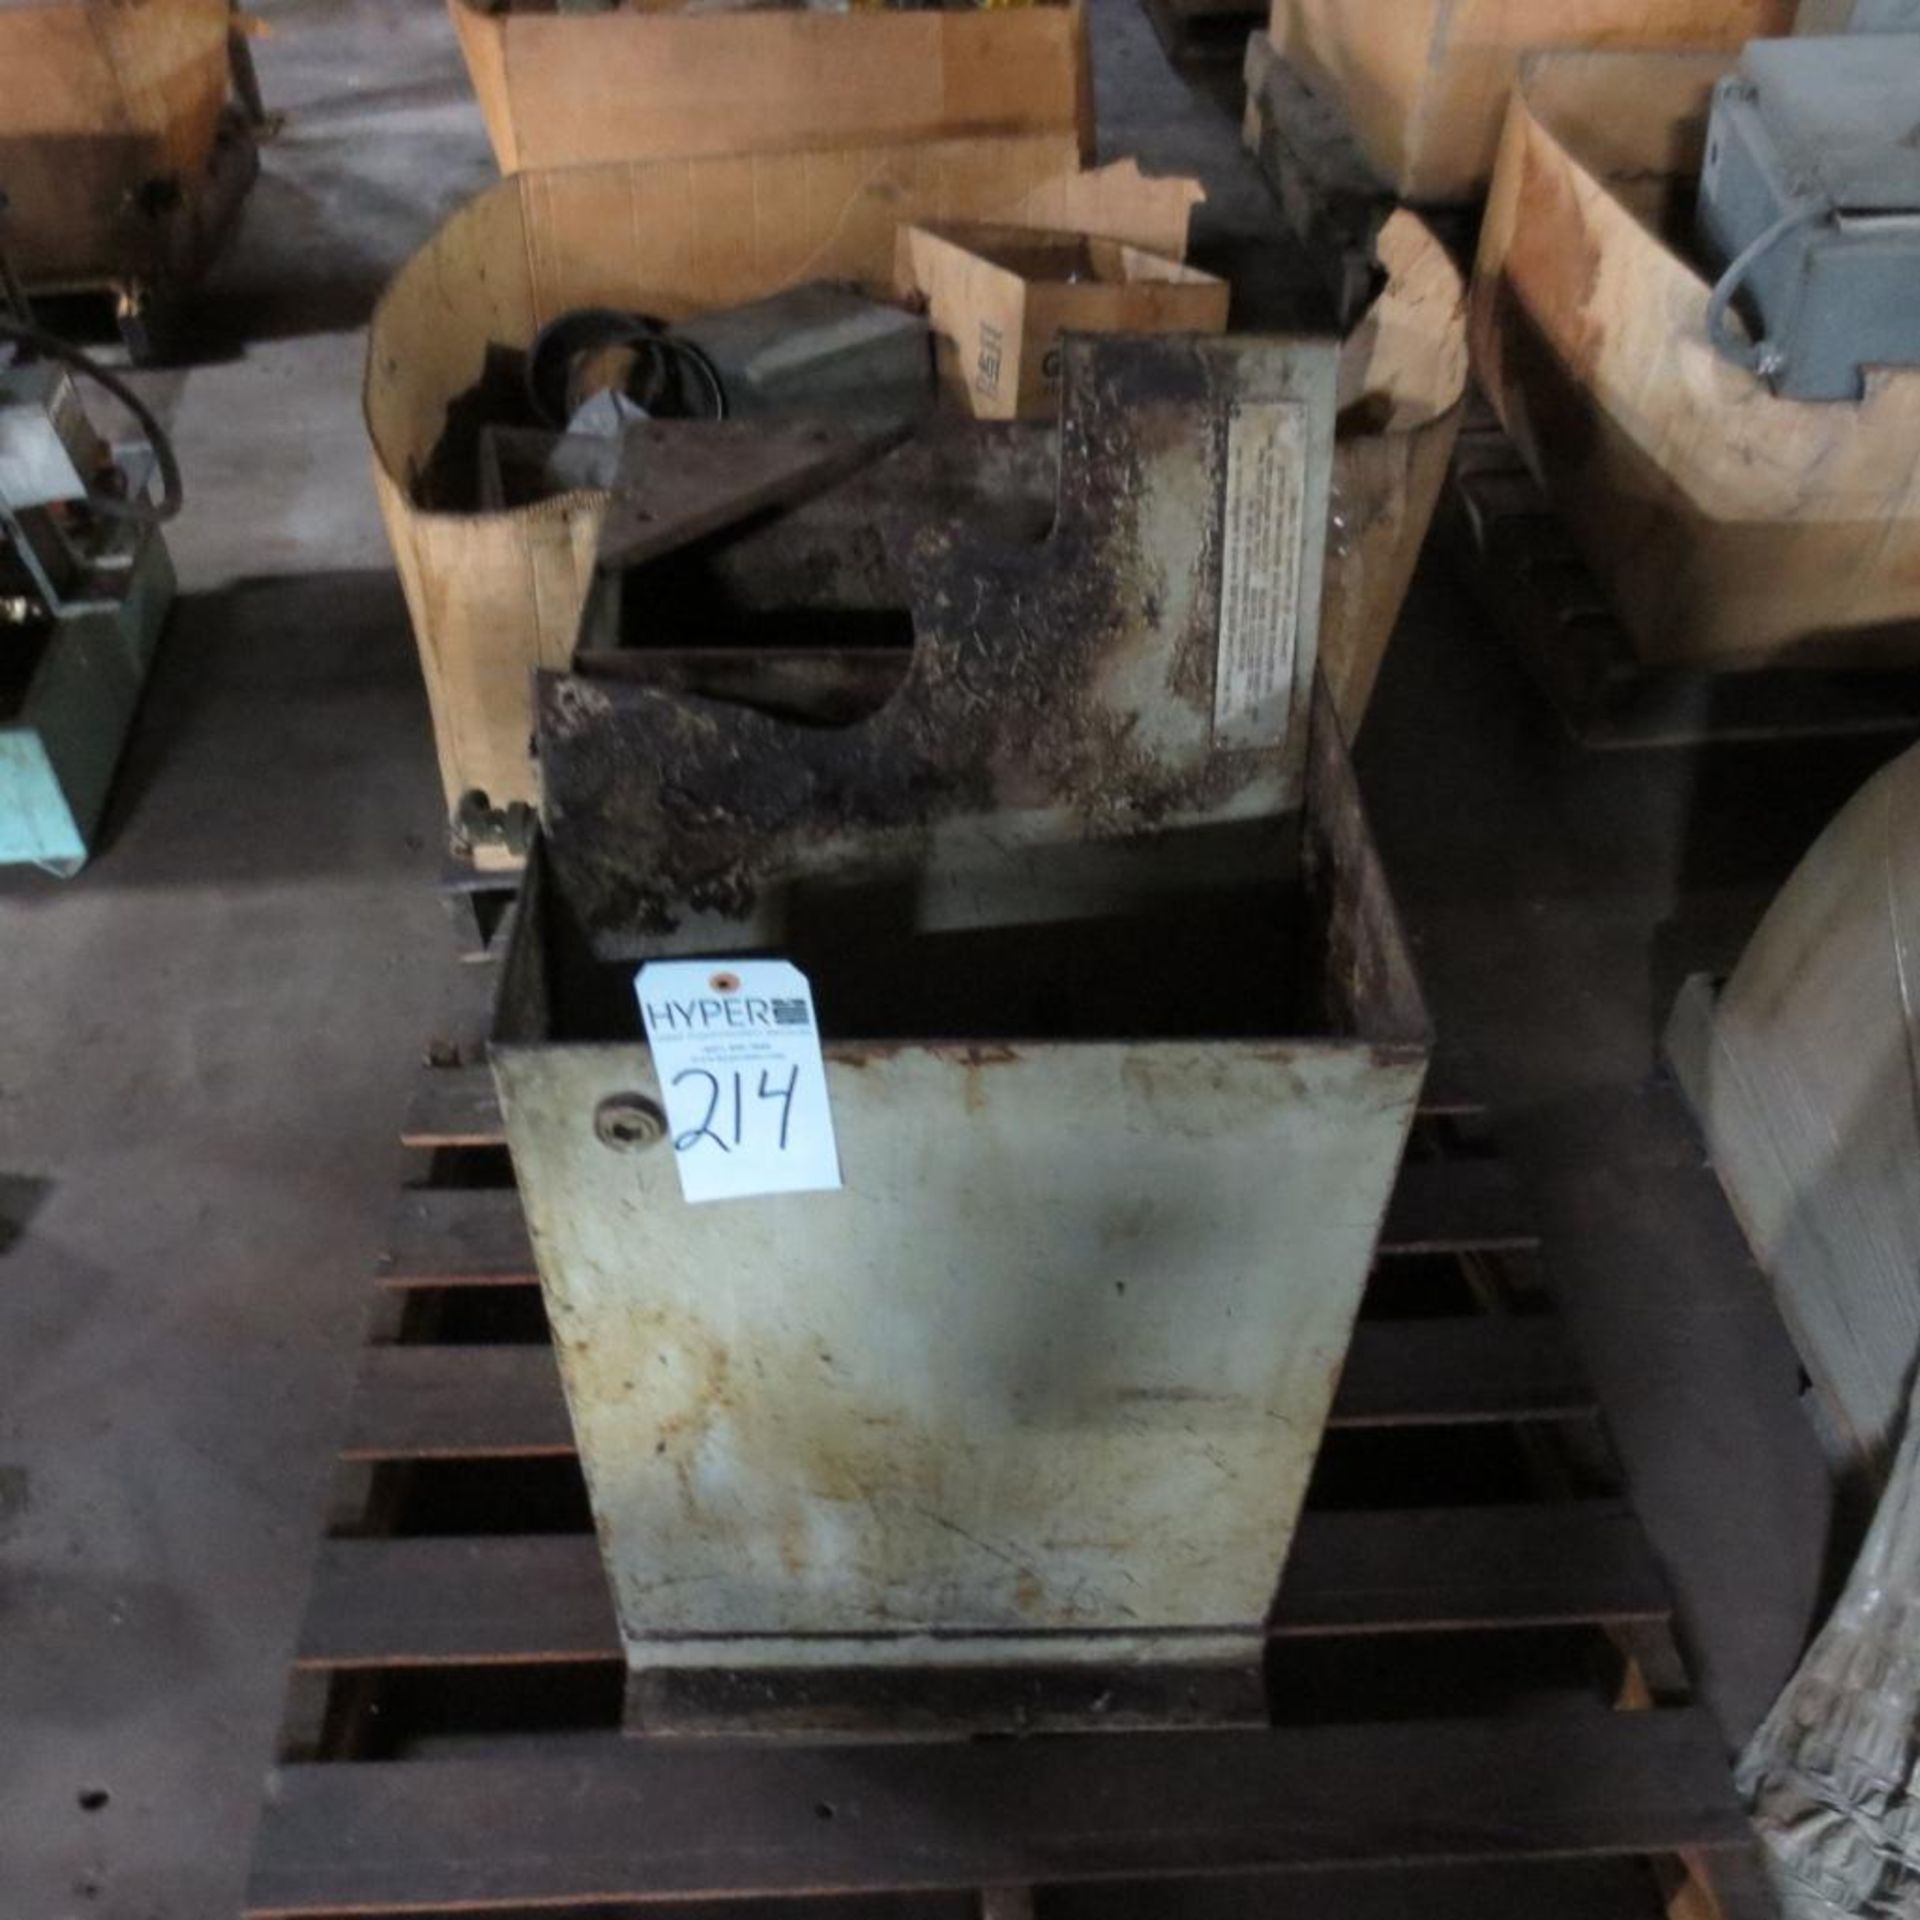 Machine Parts and Tool Holders. Loading Fee is $100.00 - Image 2 of 6